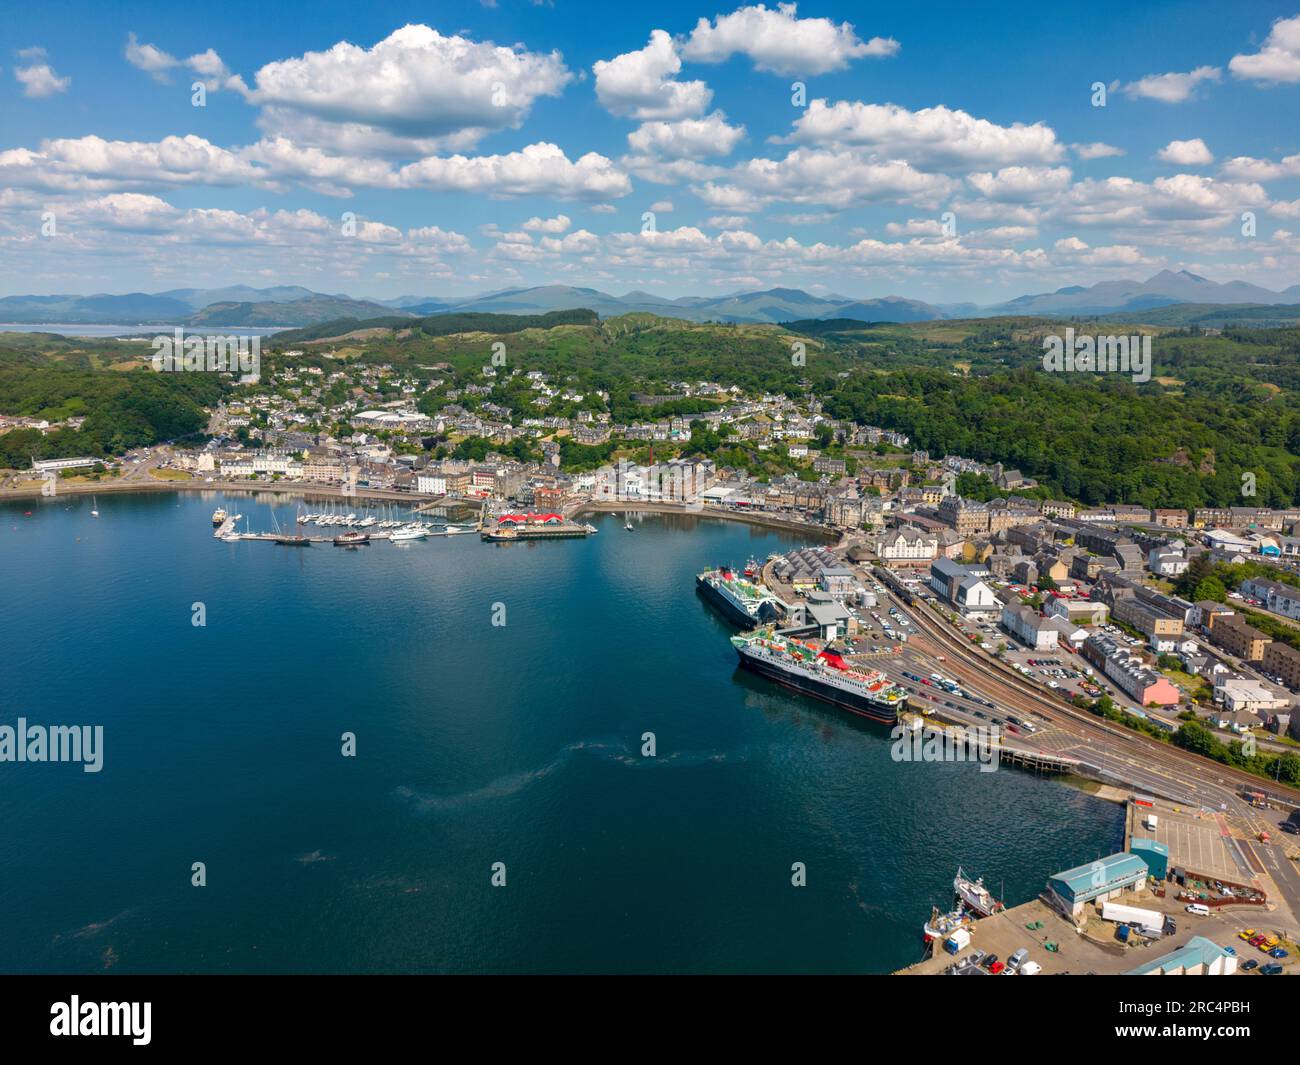 Aerial drone photo of the harbour town Oban in Scotland. It has a large ferry port and an old town centre at the bay. Stock Photo